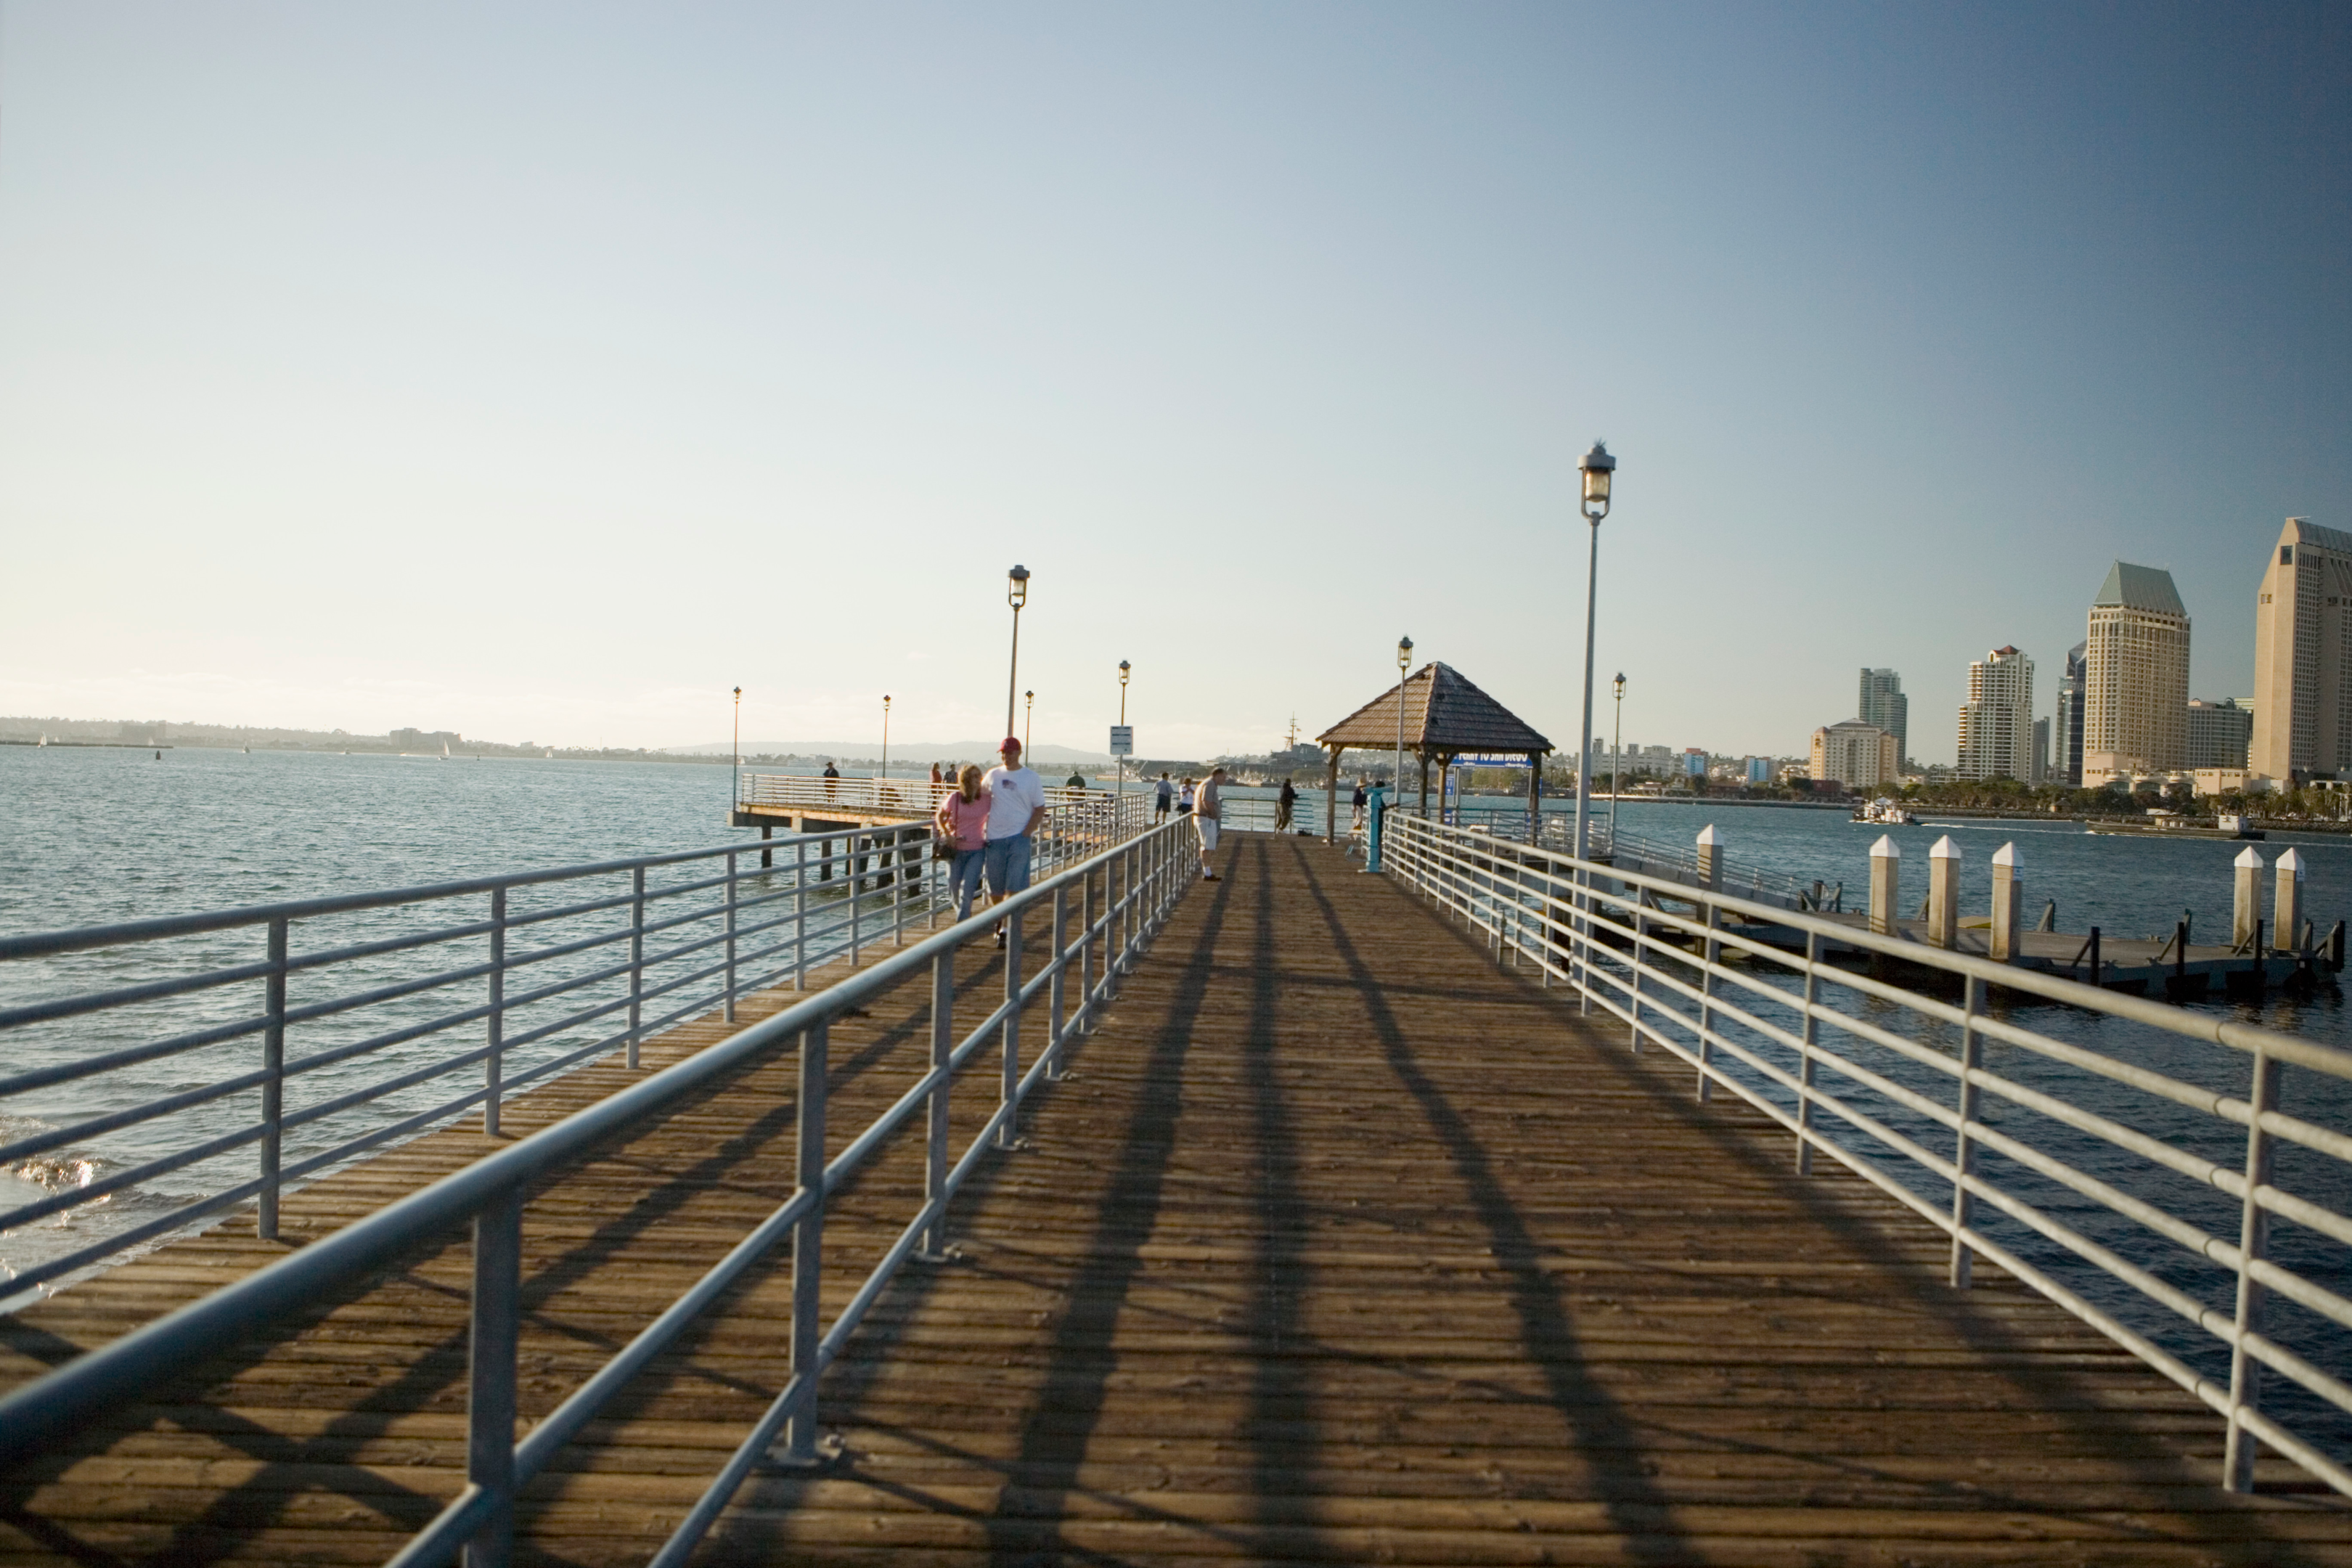 People walking on a pier in the San Diego bay area